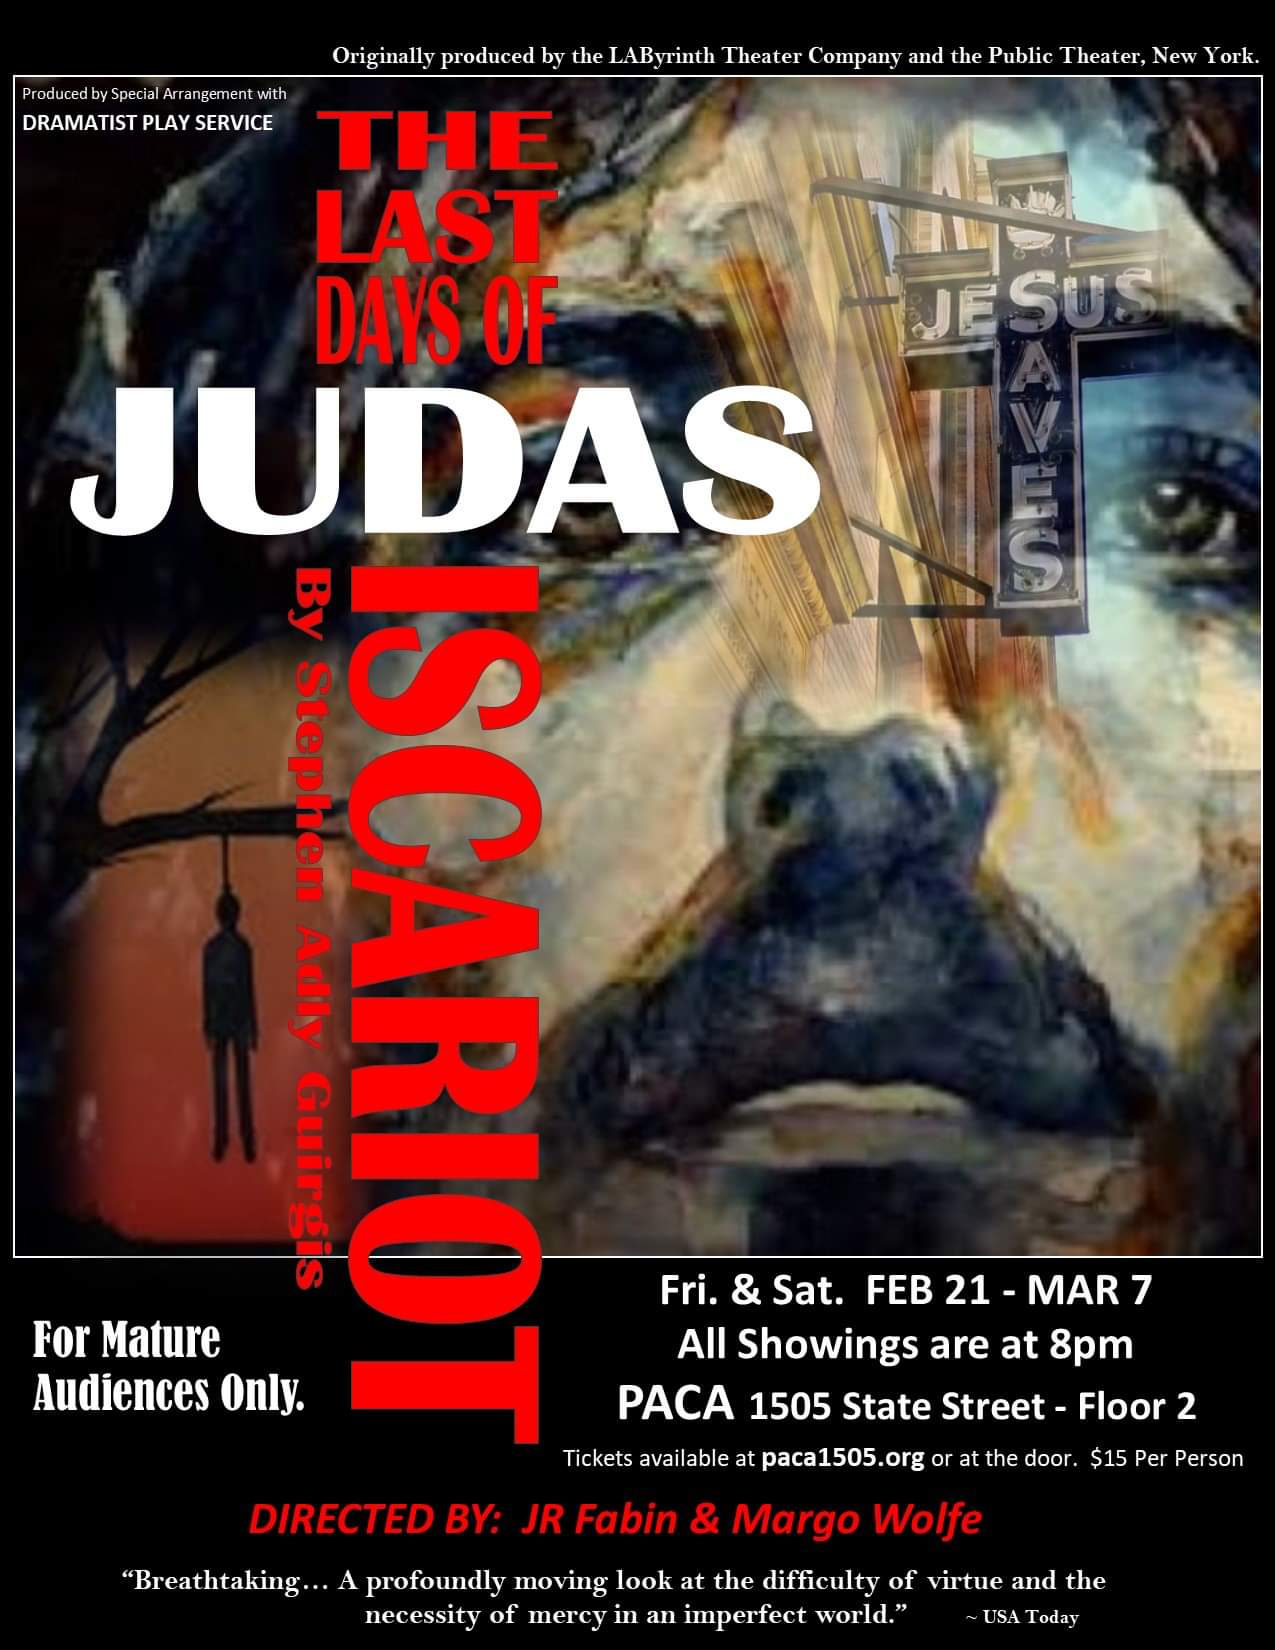 The Last Days of Judas Iscariot by Stephen Adly Guirgis